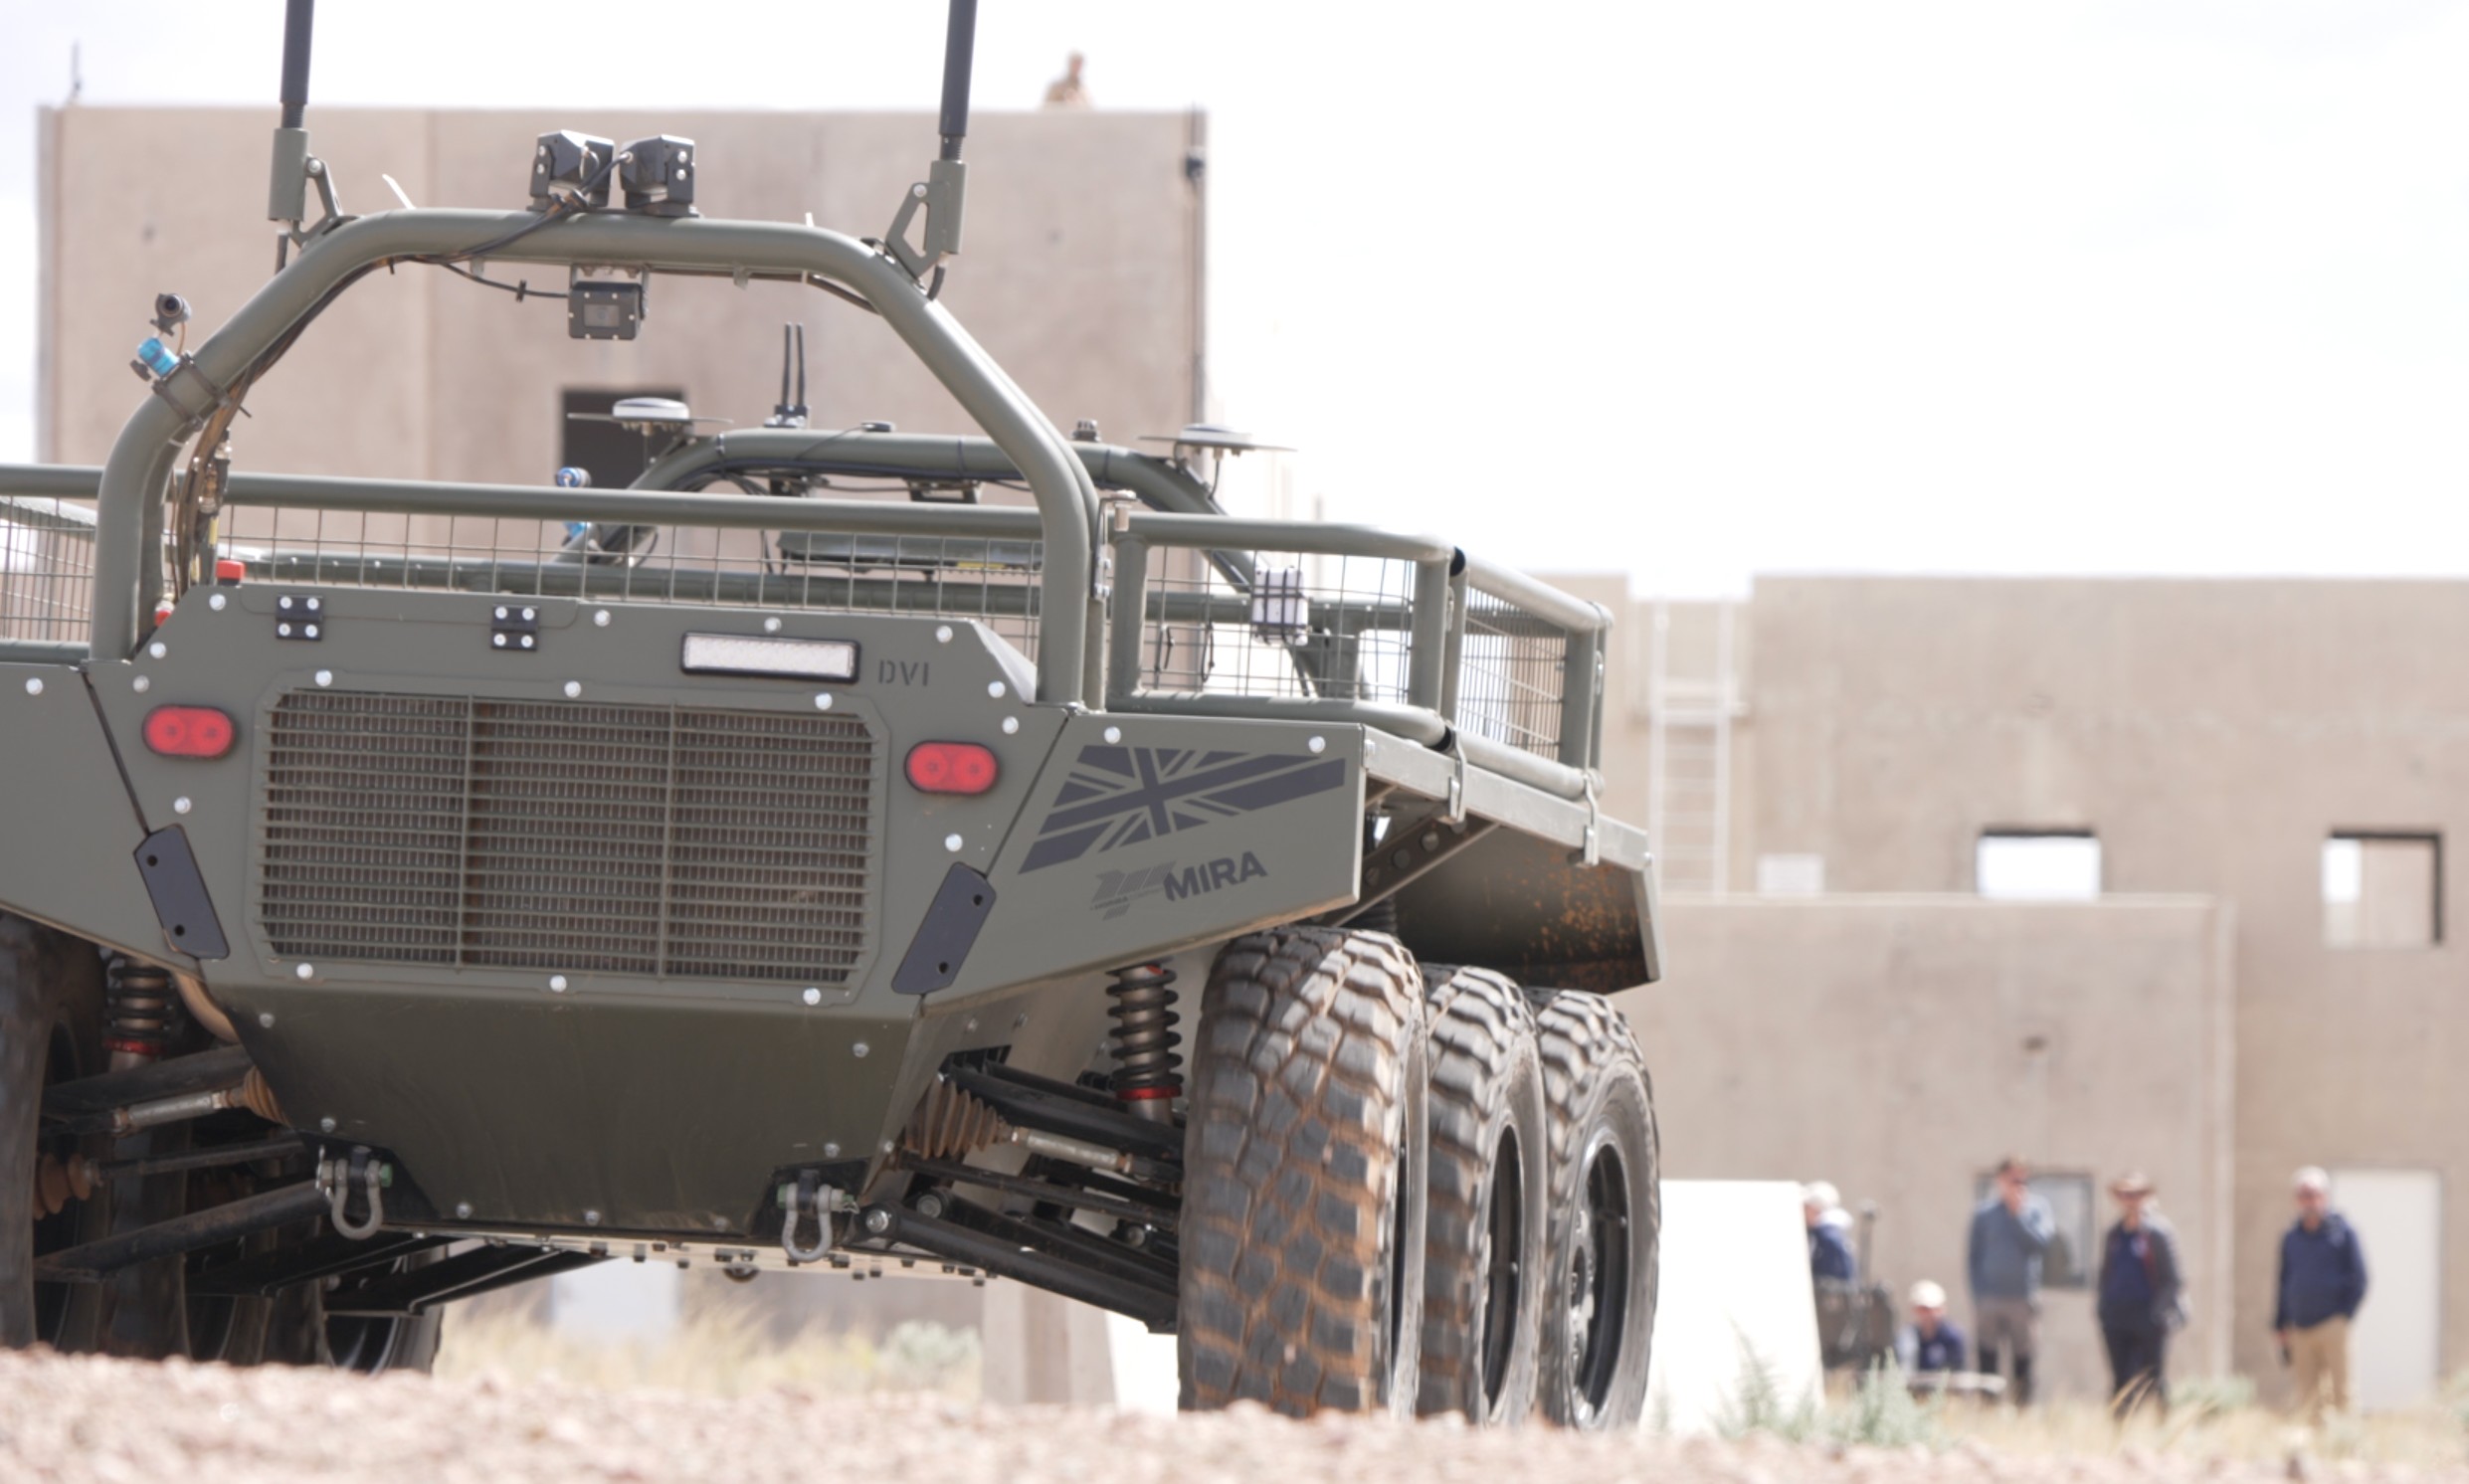 A Trusted Operation of Robotic Vehicles in a Contested Environment (TORVICE) trial was held in South Australia in late 2023. The live trial involved personnel from Australia, the US and UK testing autonomous ground vehicles in a contested electronic warfare environment. TORVICE is part of Australia's commitment to AUKUS Pillar II Advanced Capabilities.